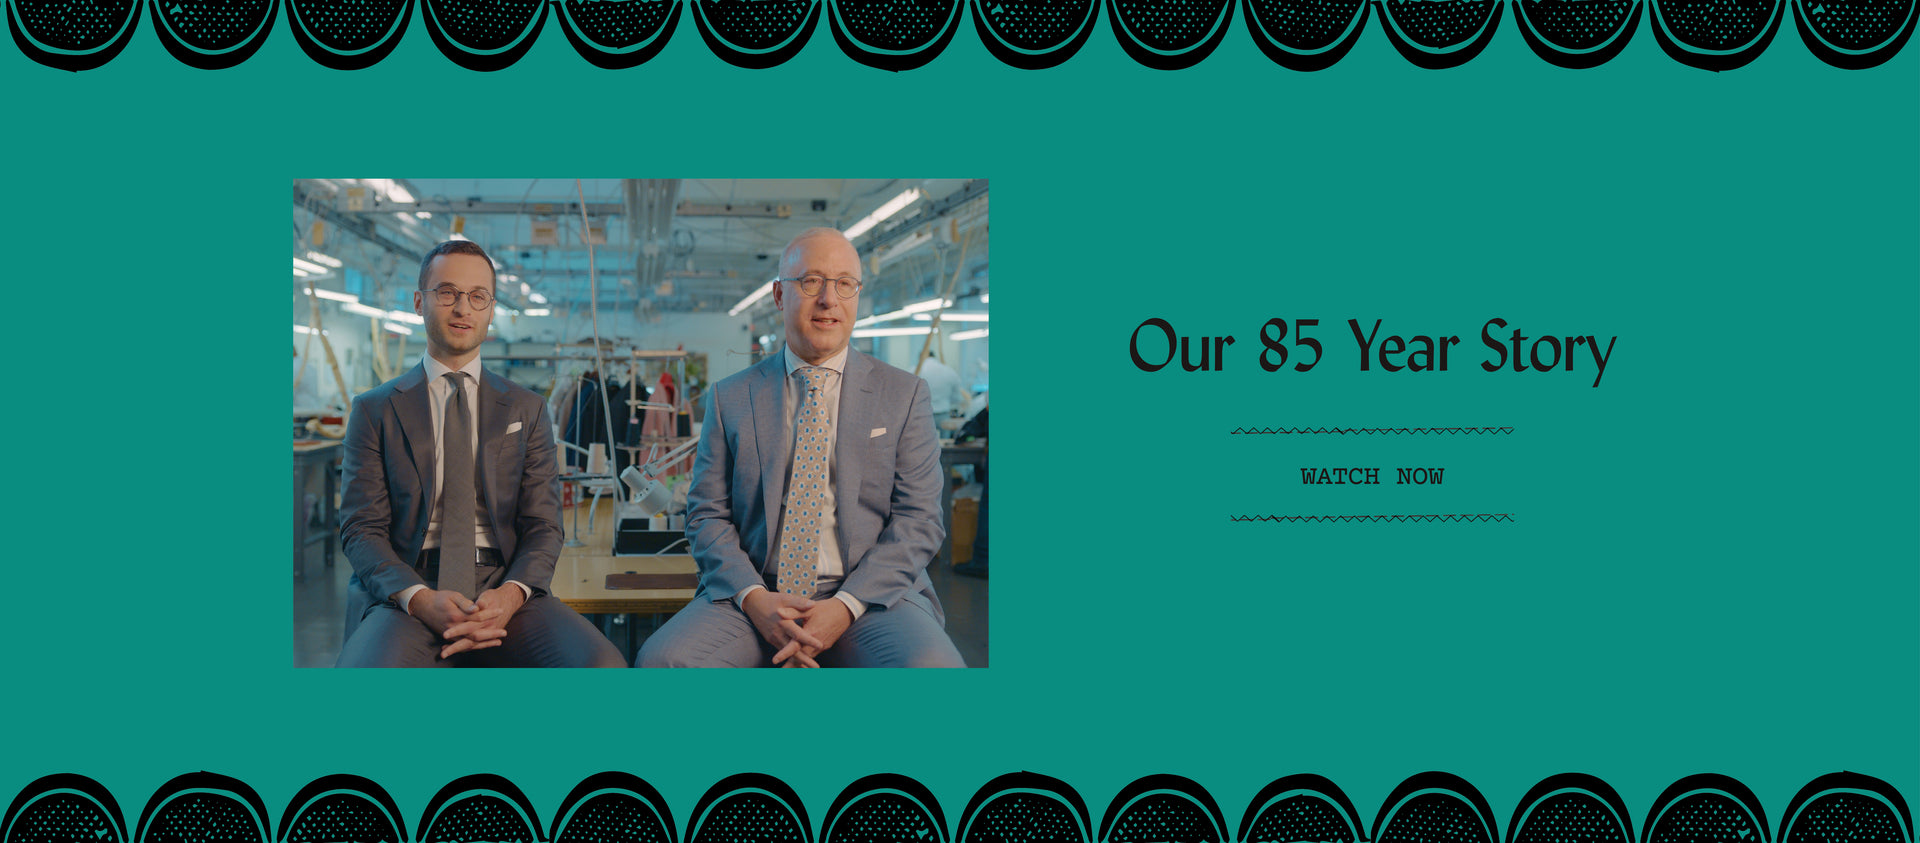 Load video: Our 85 Year Story